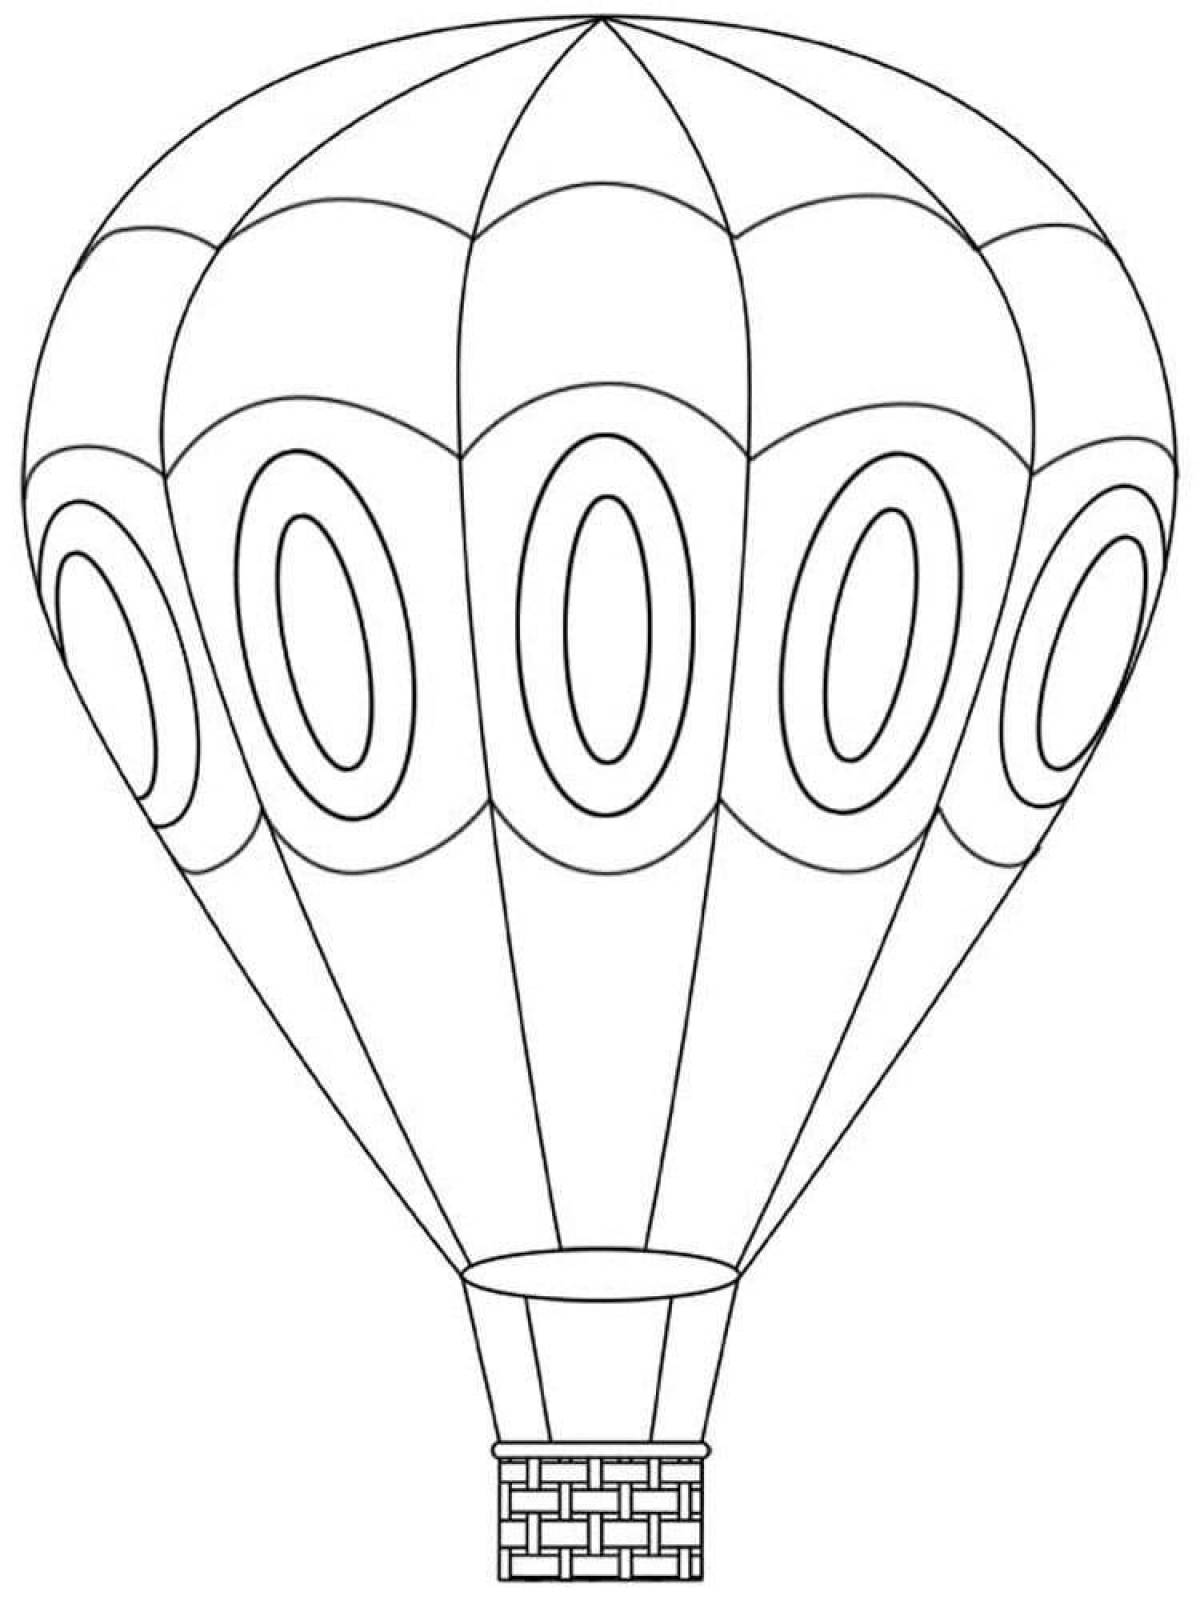 Coloring balloon with a basket